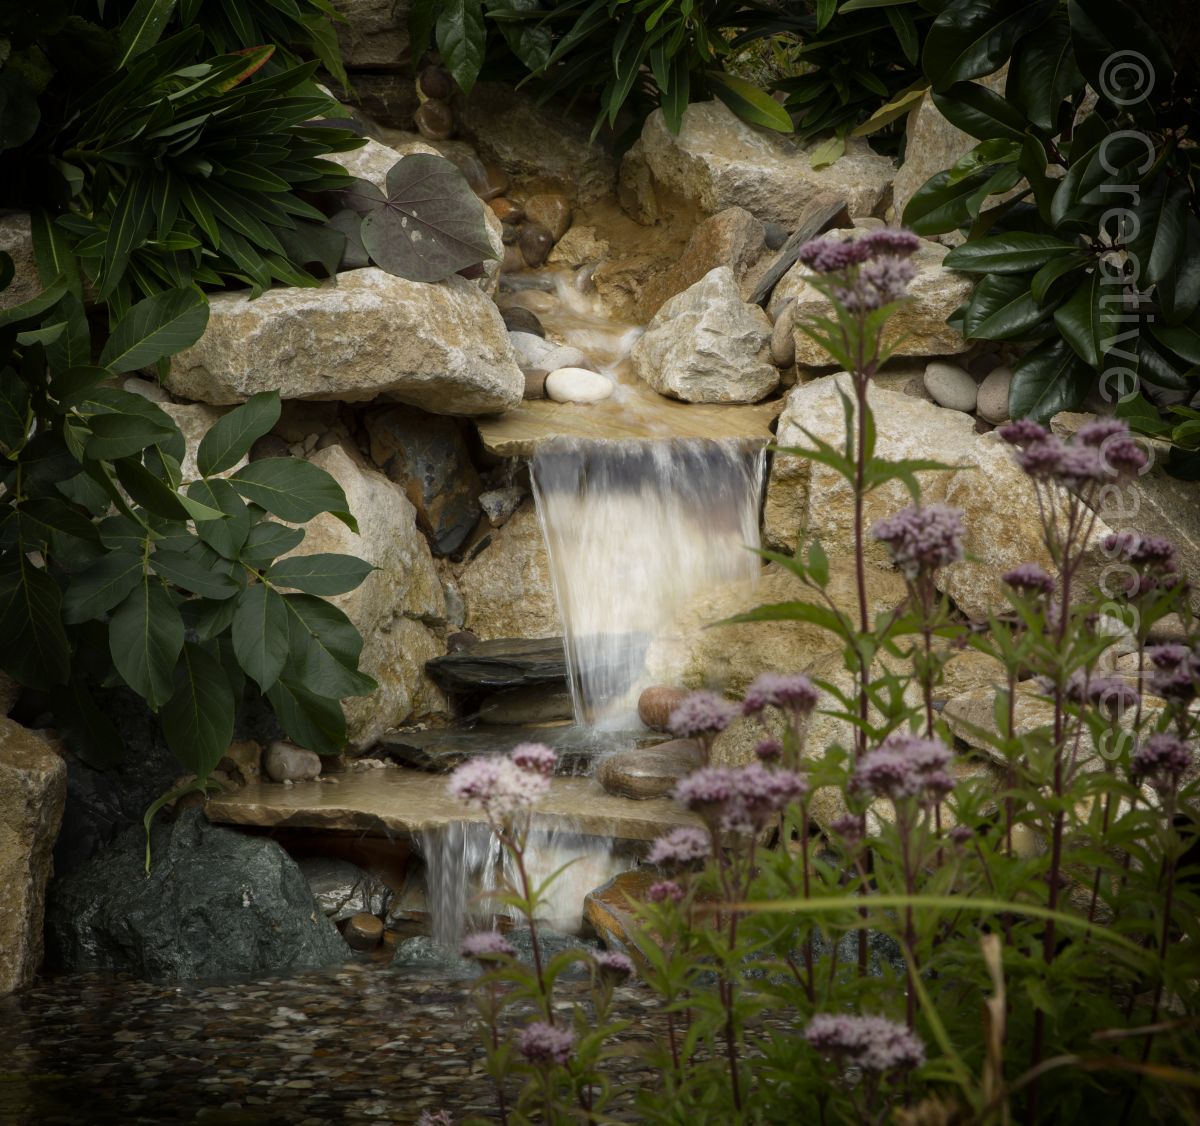 Clients wanted us to incorporate some old patio flags into this waterfall which is set-off nicely with native Hemp flowers  - Landscaping and Water Features -  Creative Cascades